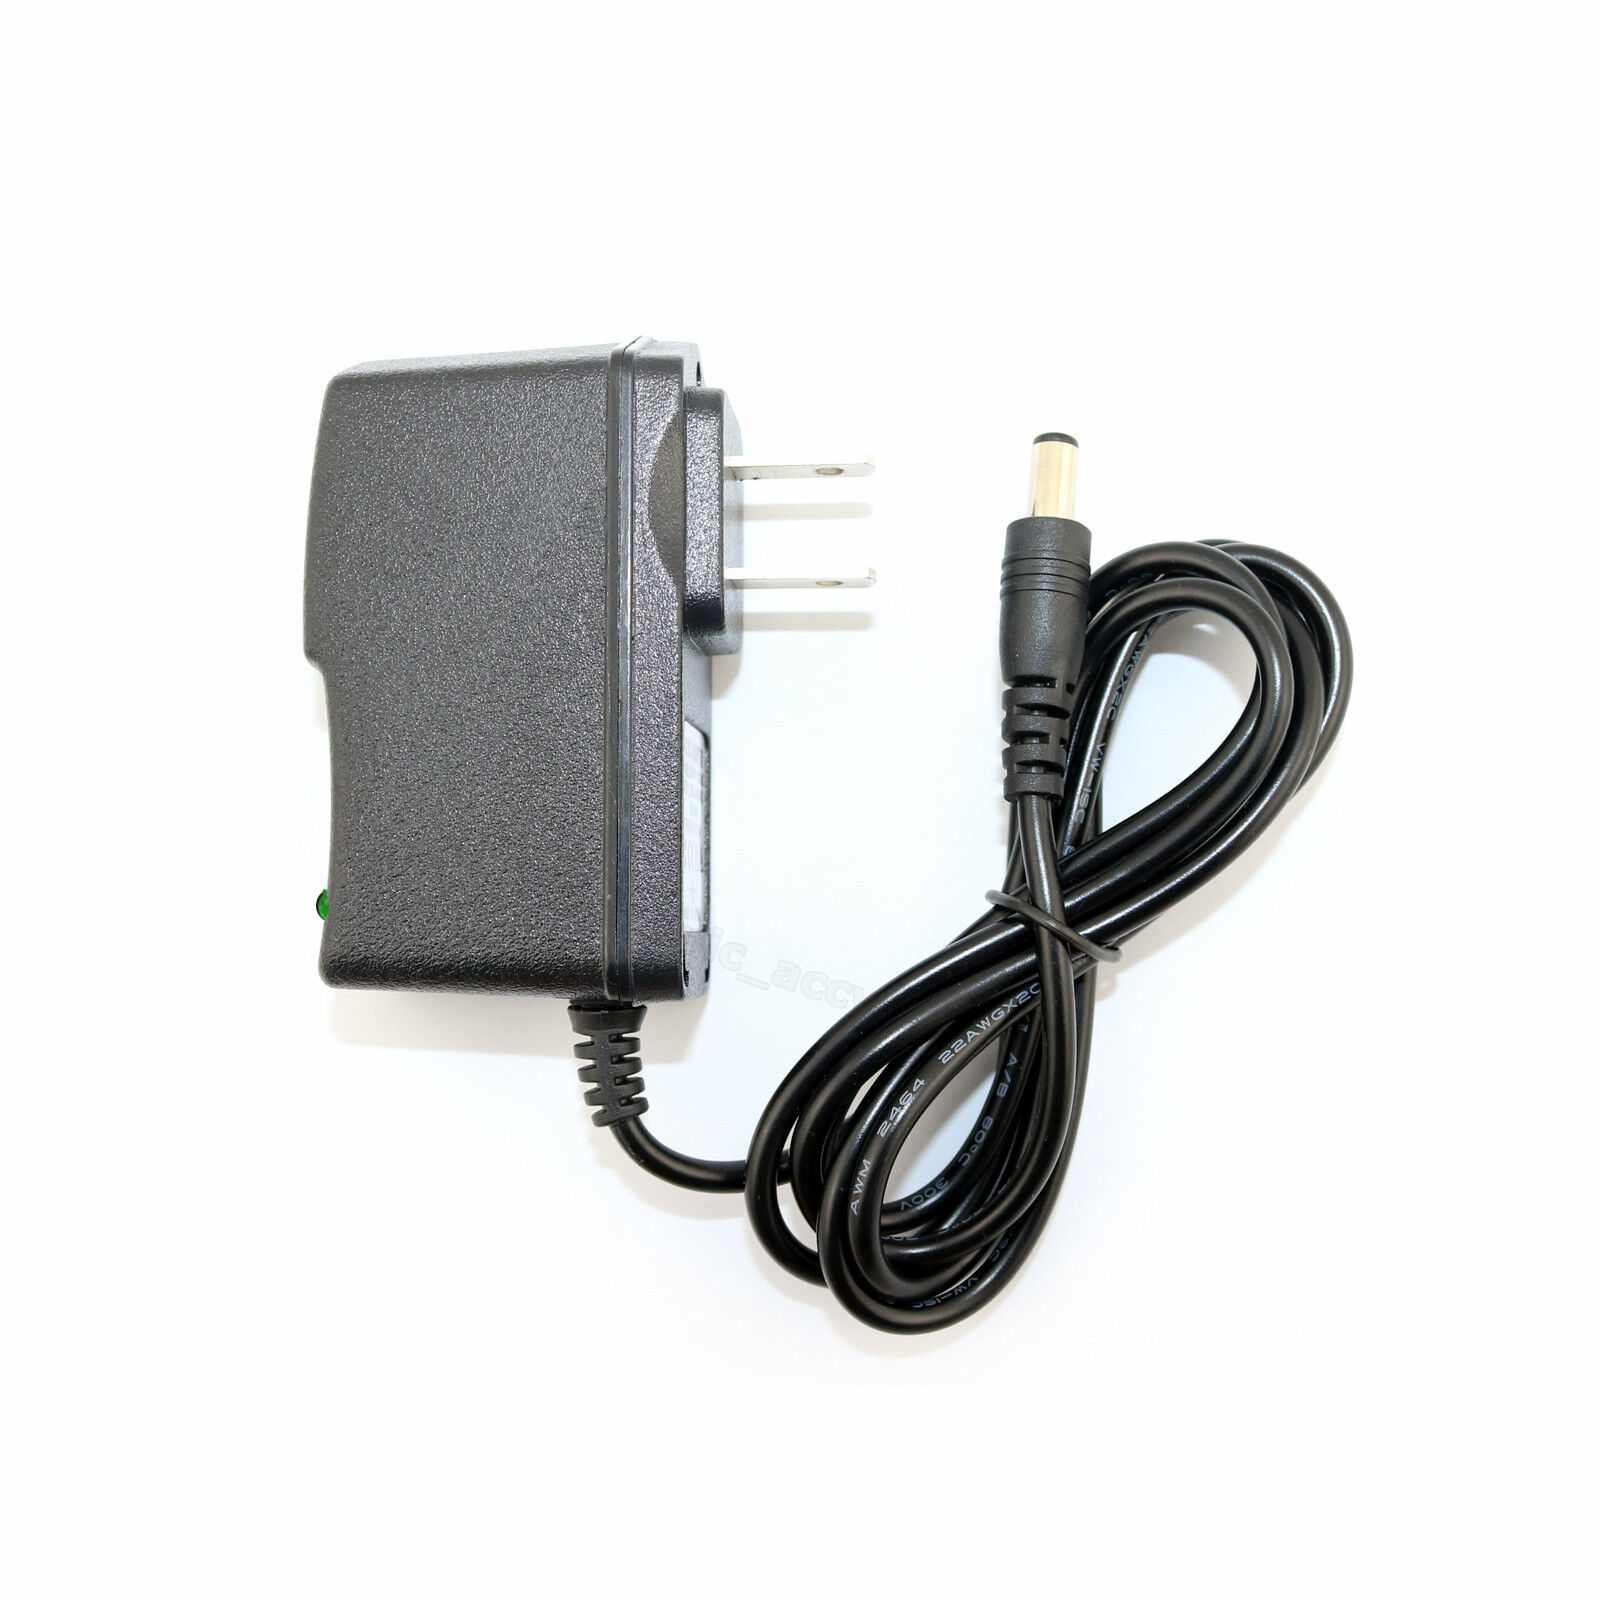 New 3.6W AC/DC Adapter 6V 0.6A Power Supply Charger 5.5mm x 2.5/